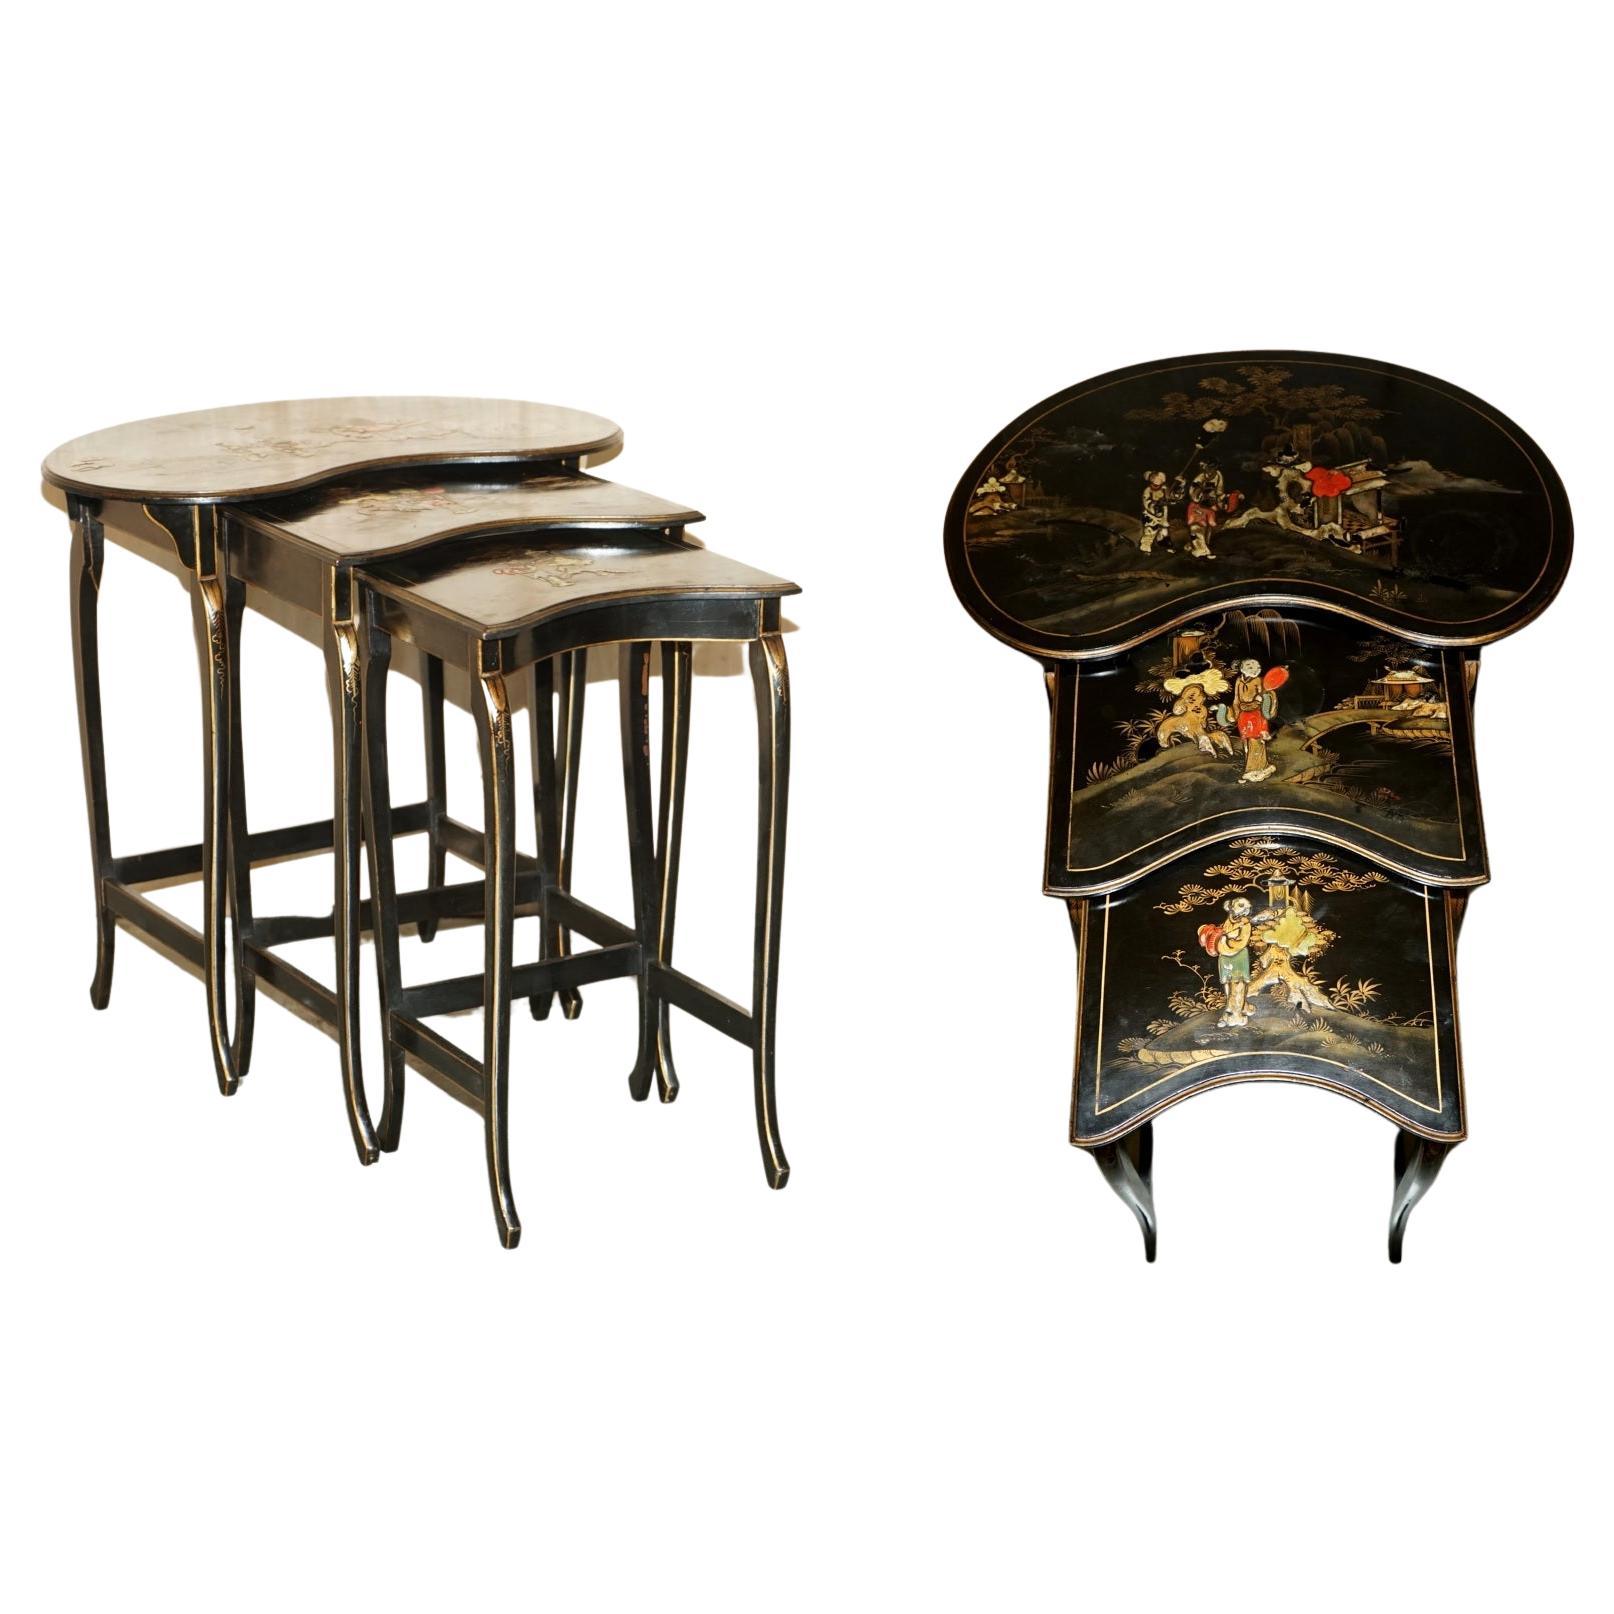 NEST OF THREE CIRCA 1900 CHINESE CHINOISERIE LACQURERIE SIDE KIDNEY TABLEs